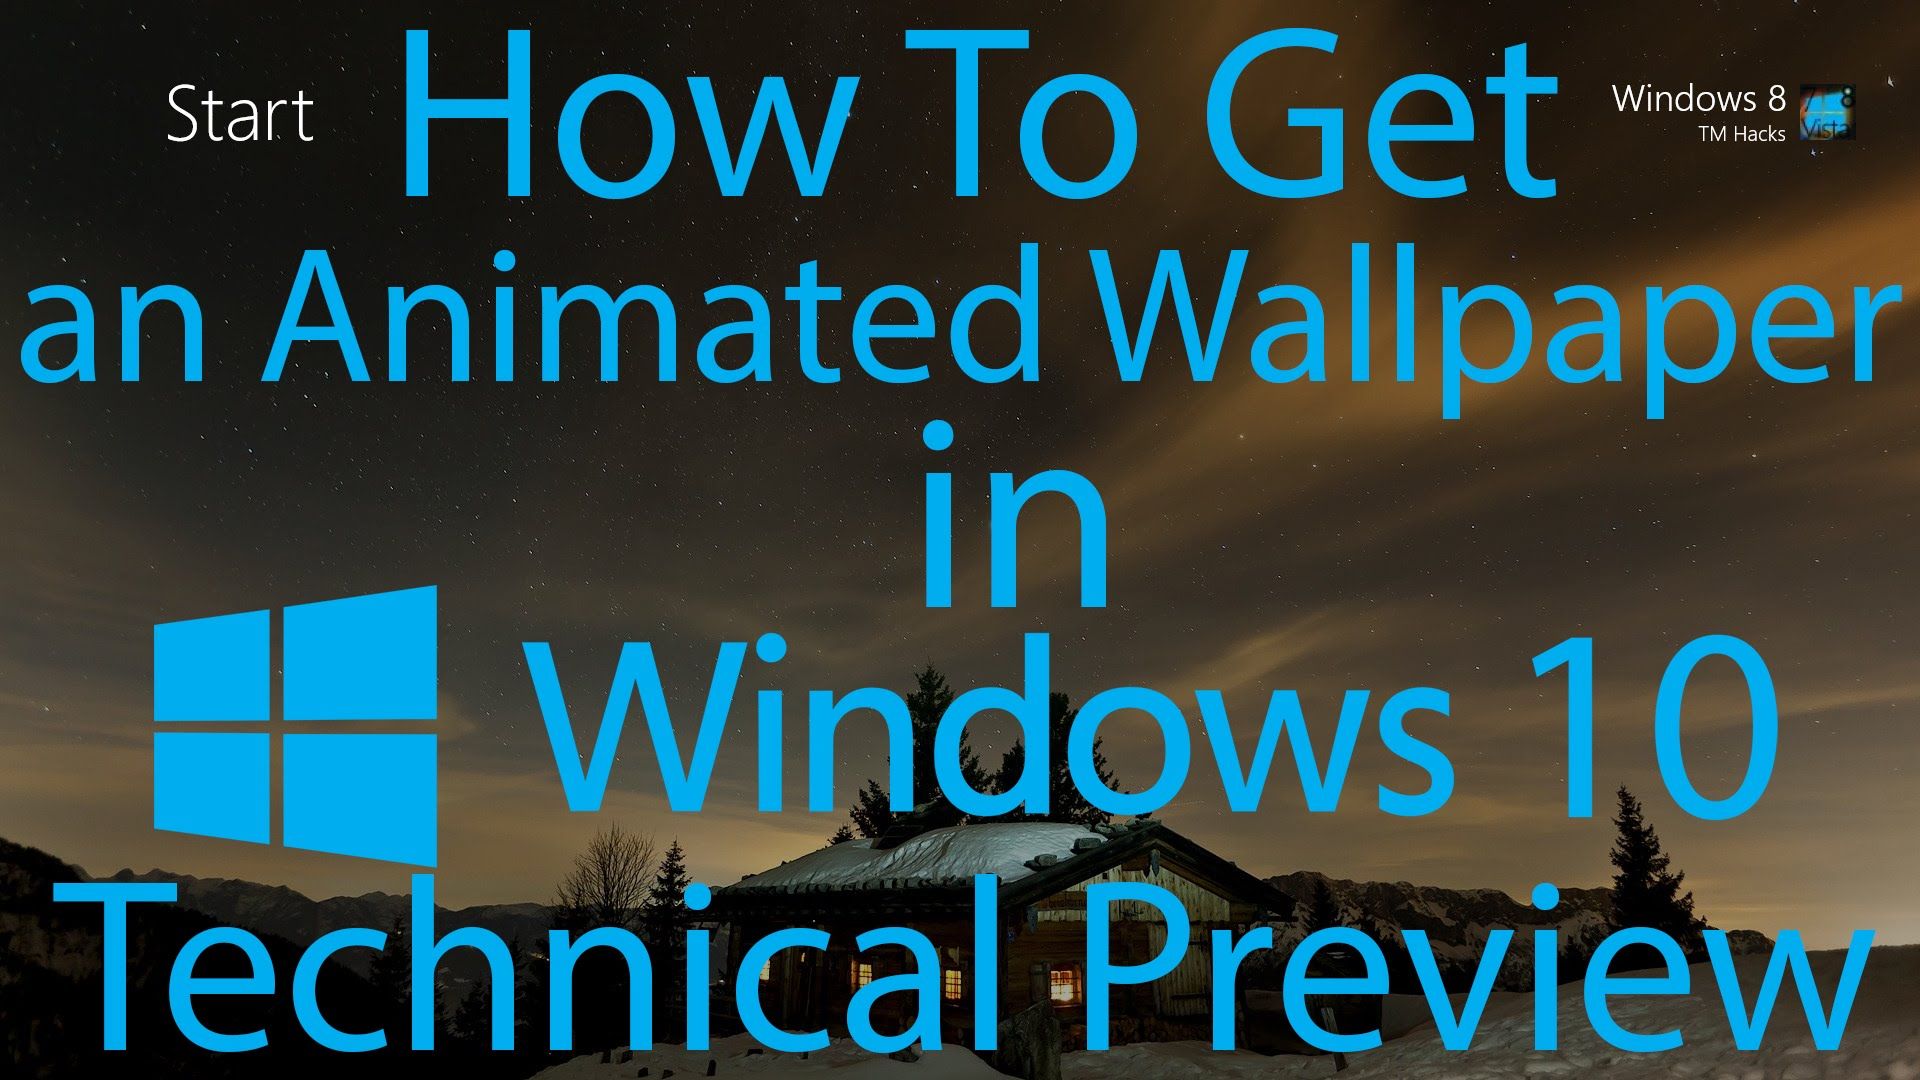 How To Have an Animated Wallpaper in Windows 10 Technical Preview